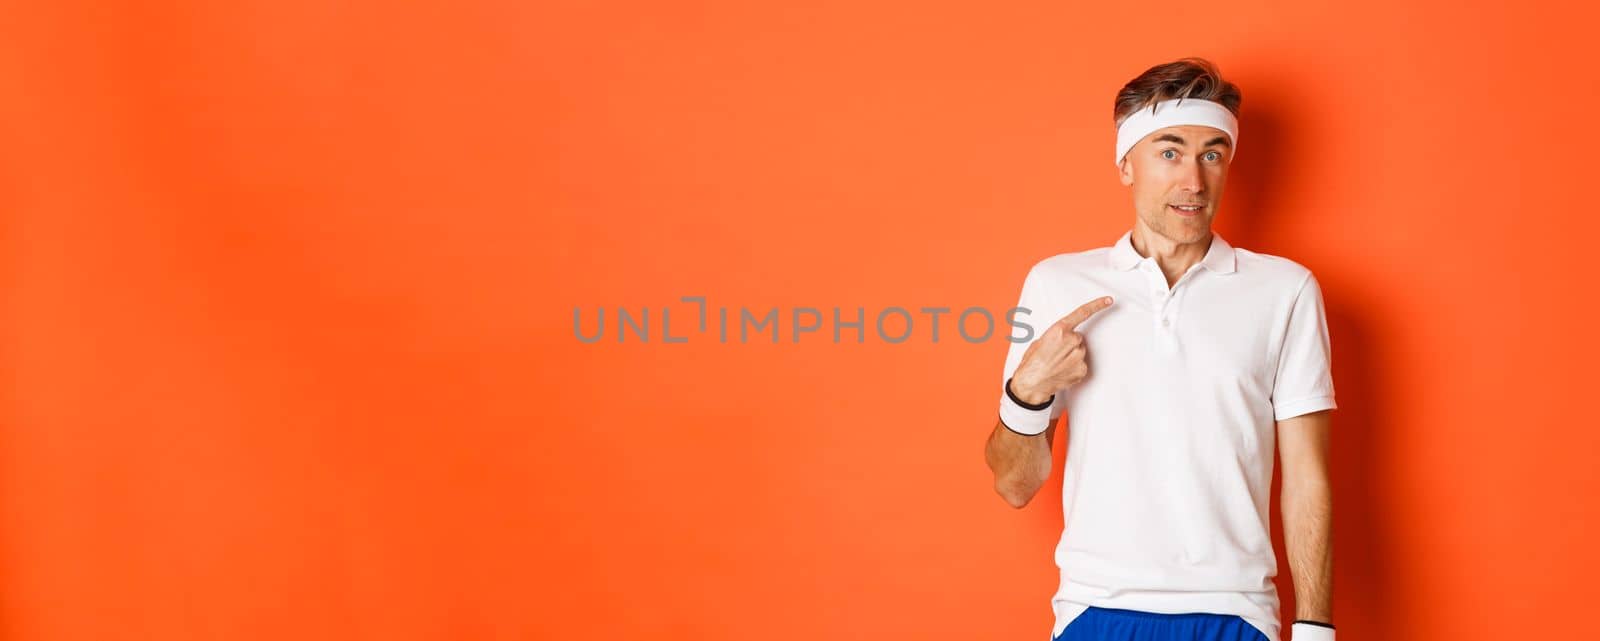 Concept of sport, fitness and lifestyle. Portrait of confused middle-aged sportsman pointing at himself, raising eyebrows puzzled, standing over orange background.